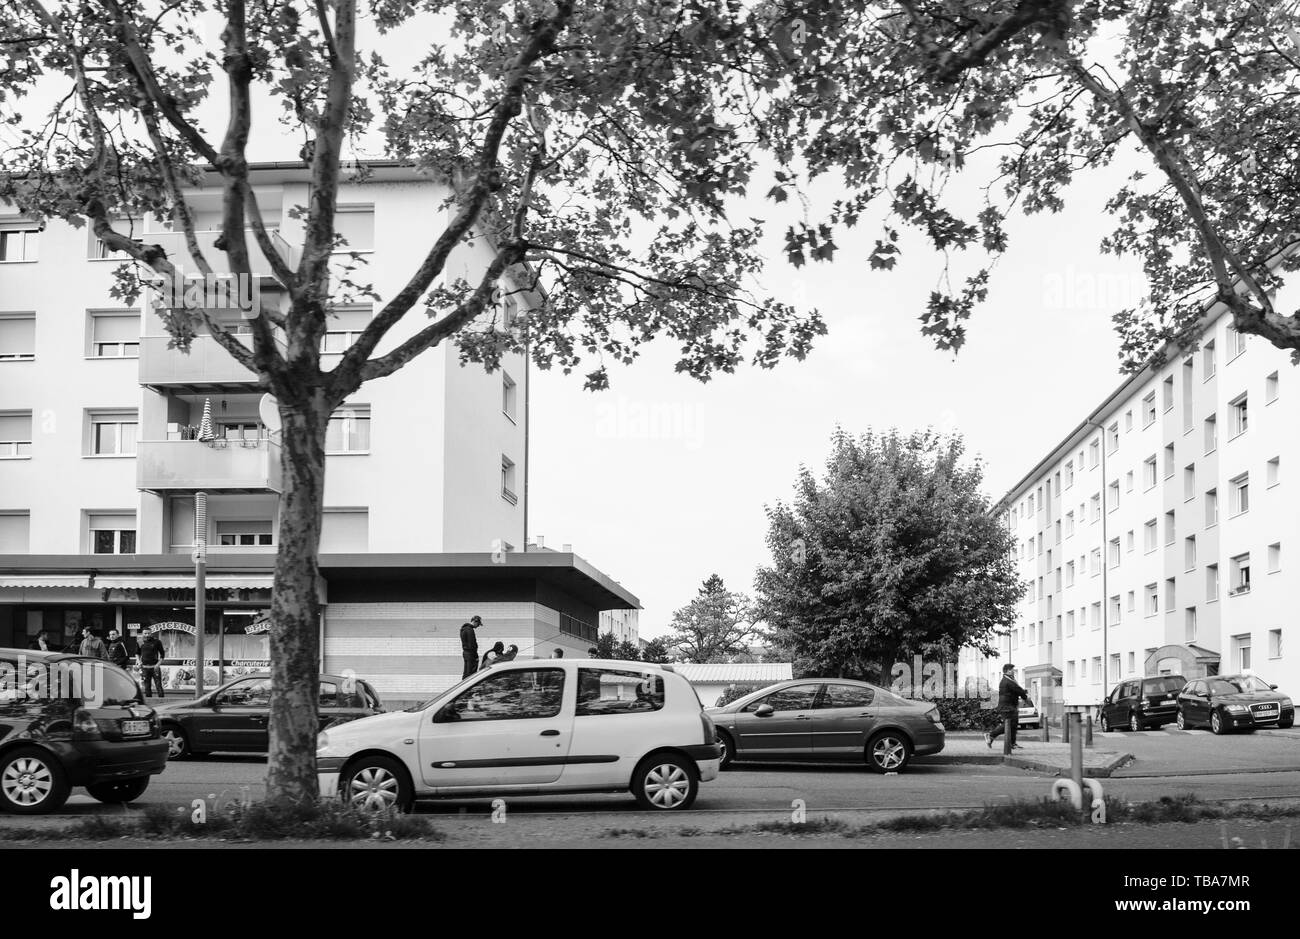 Strasbourg, France - May 3, 2018: Cite de l'Ill HLM Habitation a loyer modere rent-controlled housing French buildings with young group of arab boys - black and white Stock Photo